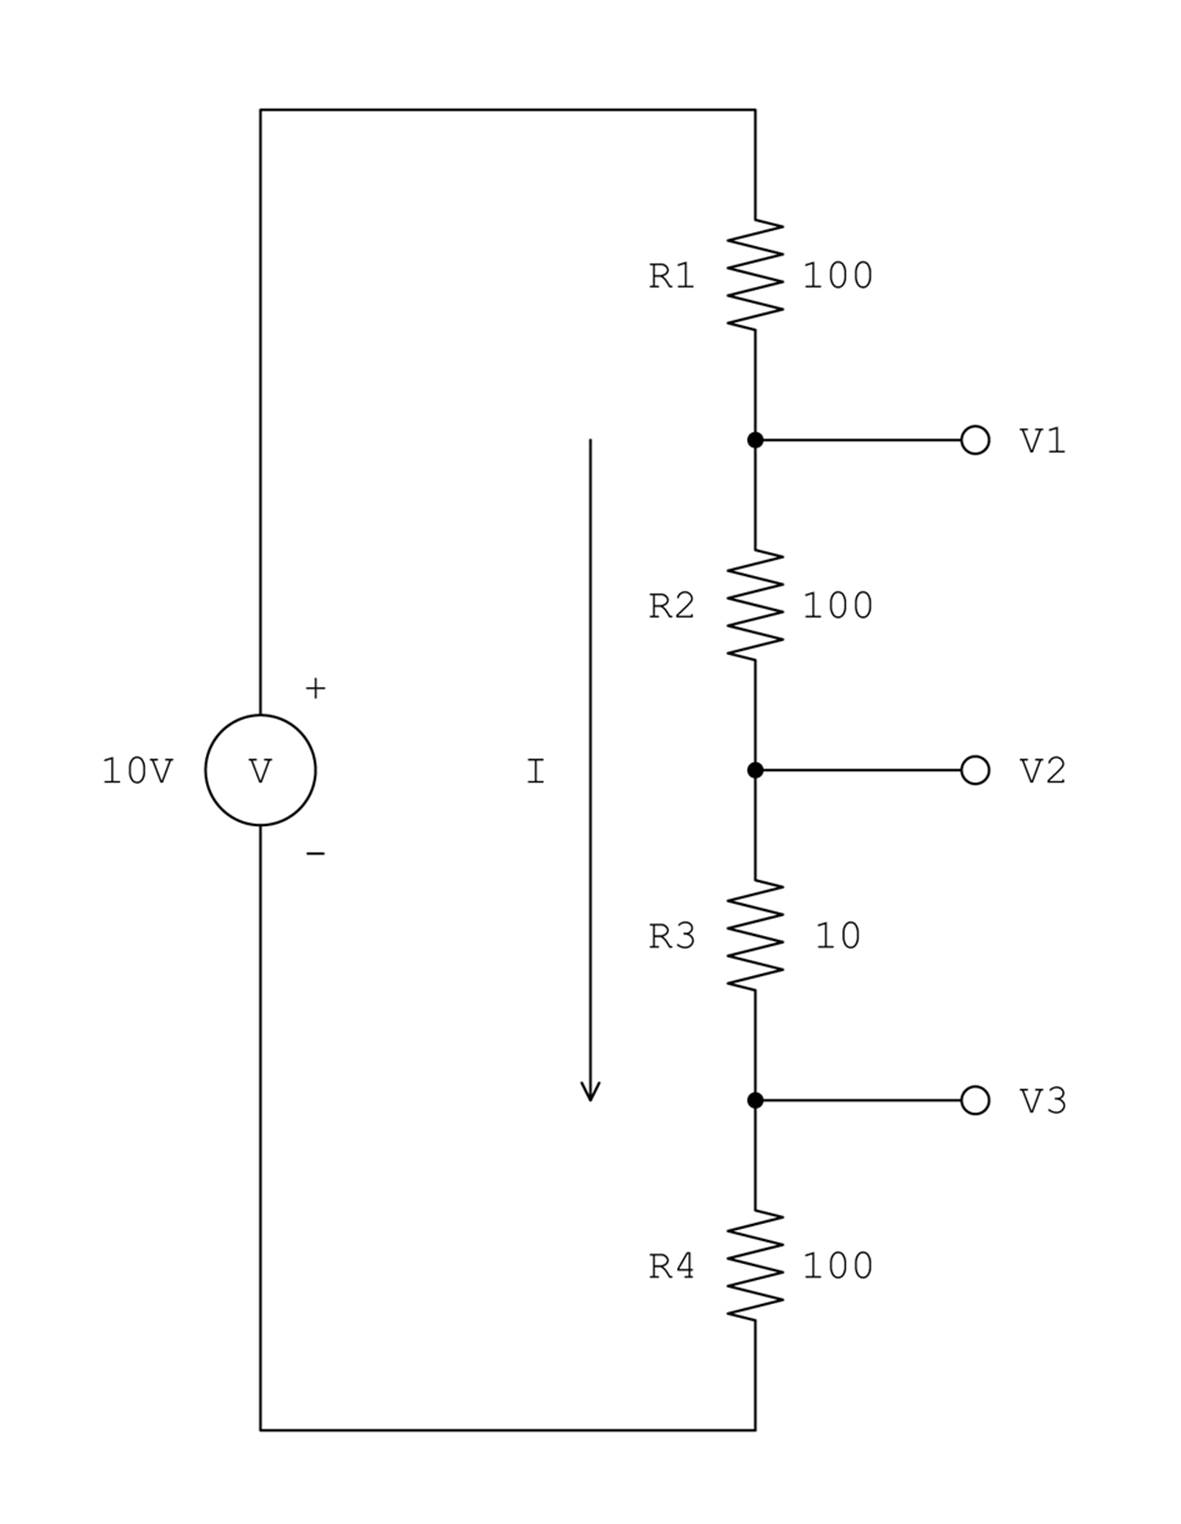 Series resistance network as a multi-tap voltage divider